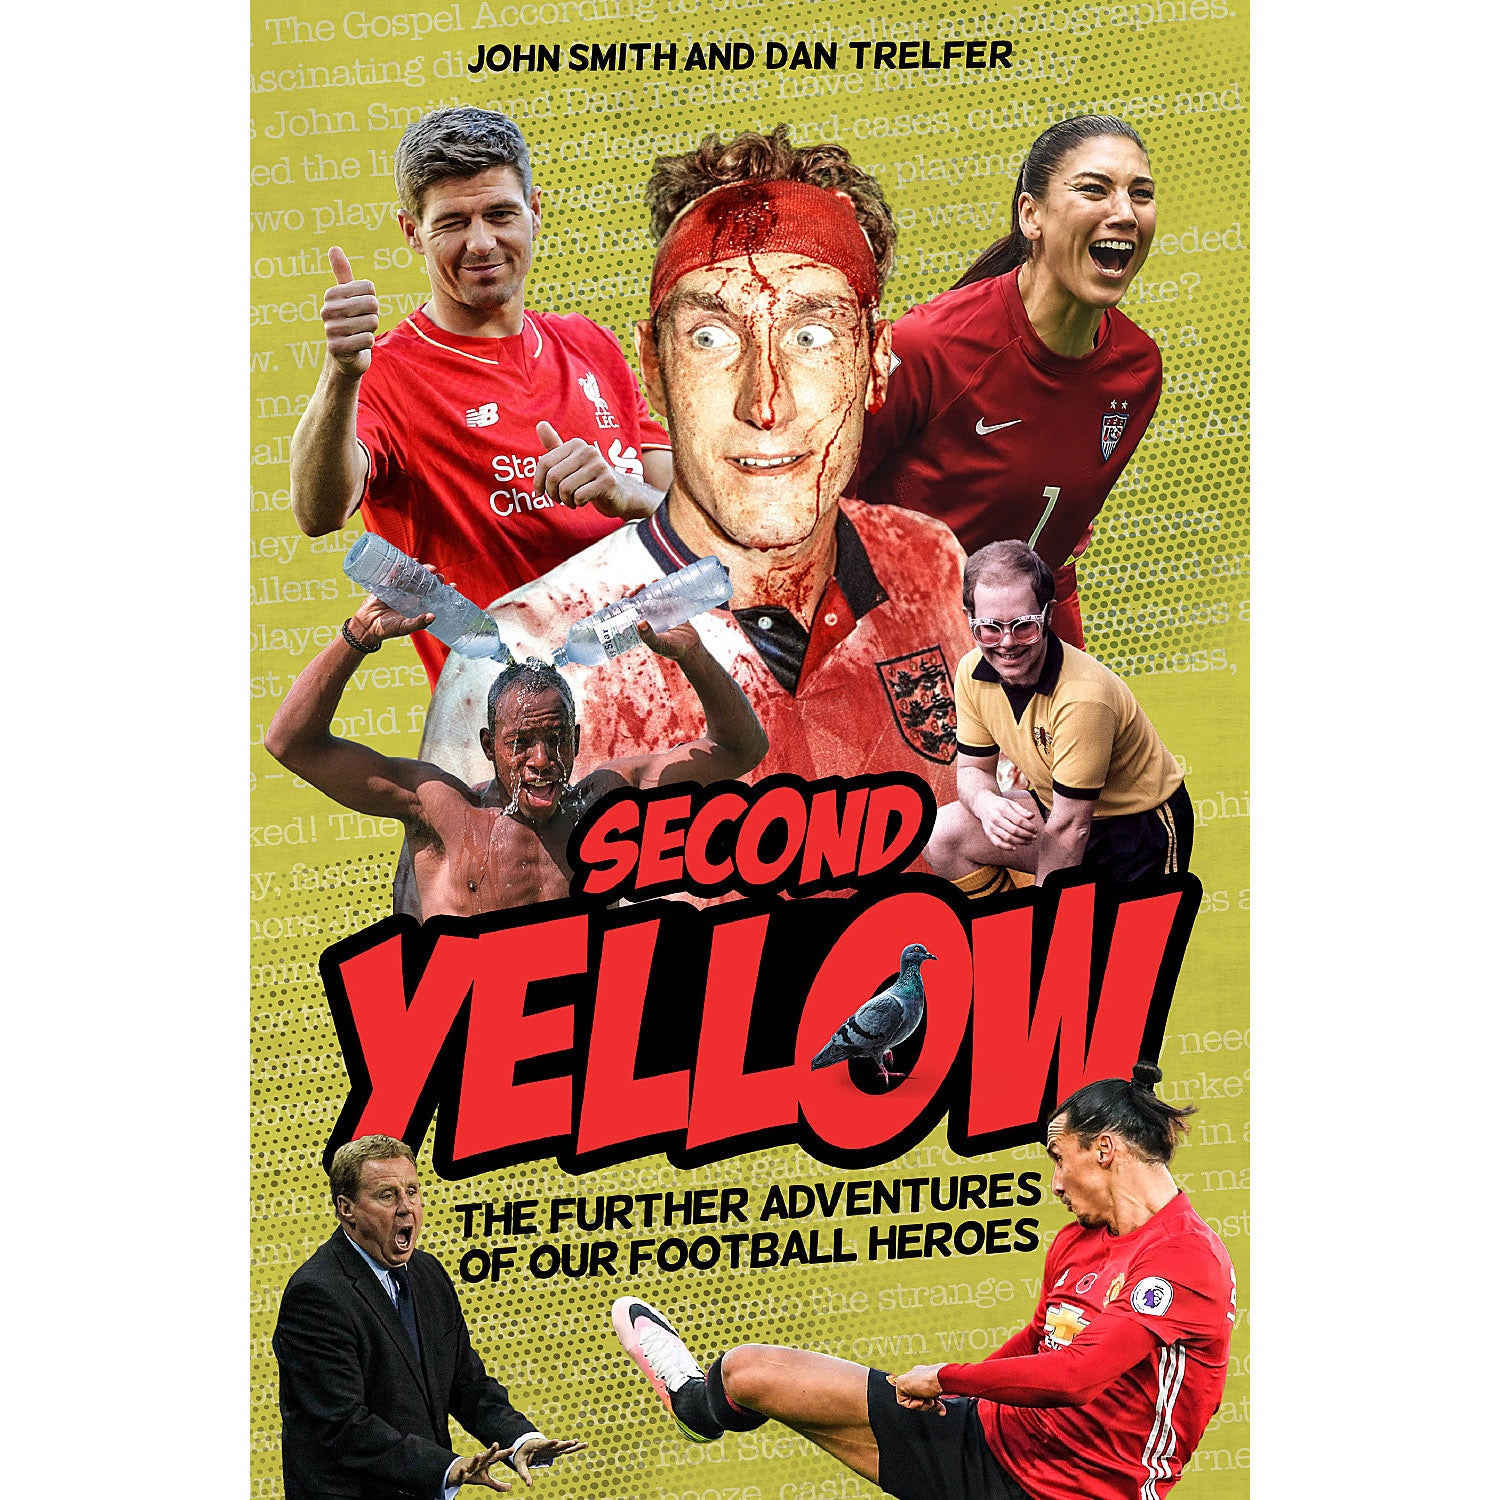 Second Yellow – The Further Adventures of our Football Heroes